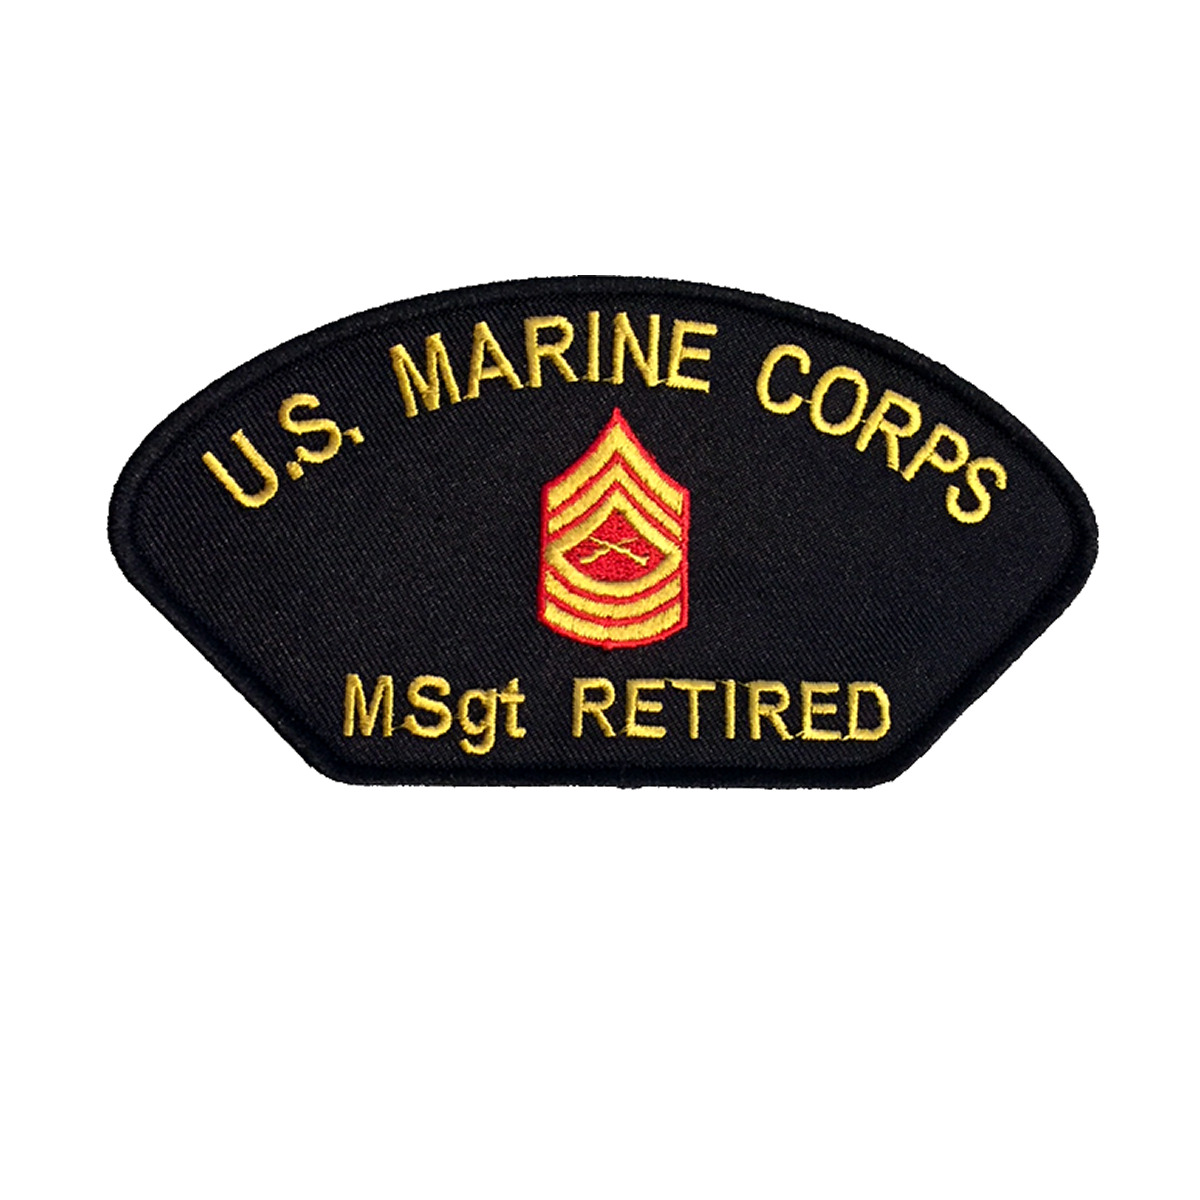 U S MARINE CORPS Msgt RETIRED with RANK INSIGNIA PATCH - Veteran Owned Business